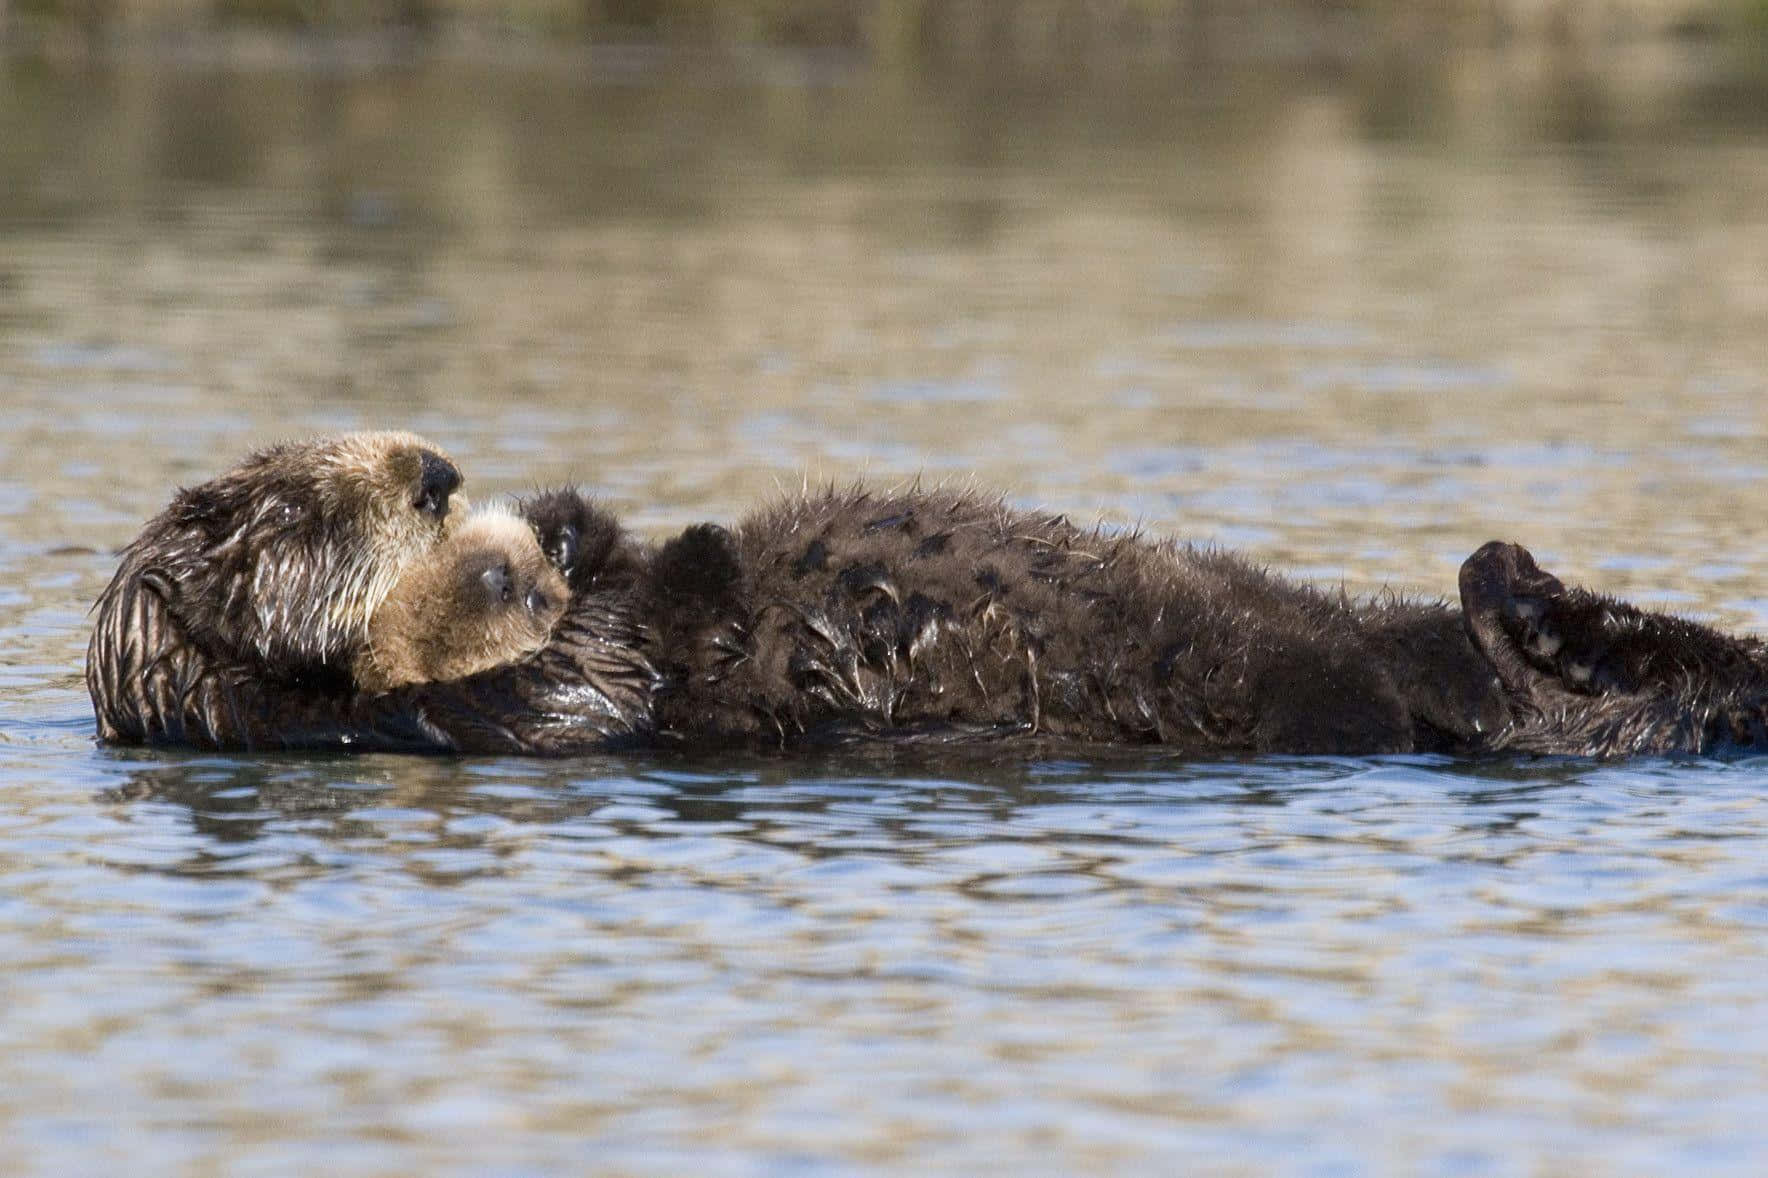 A Sea Otter Is Floating In The Water